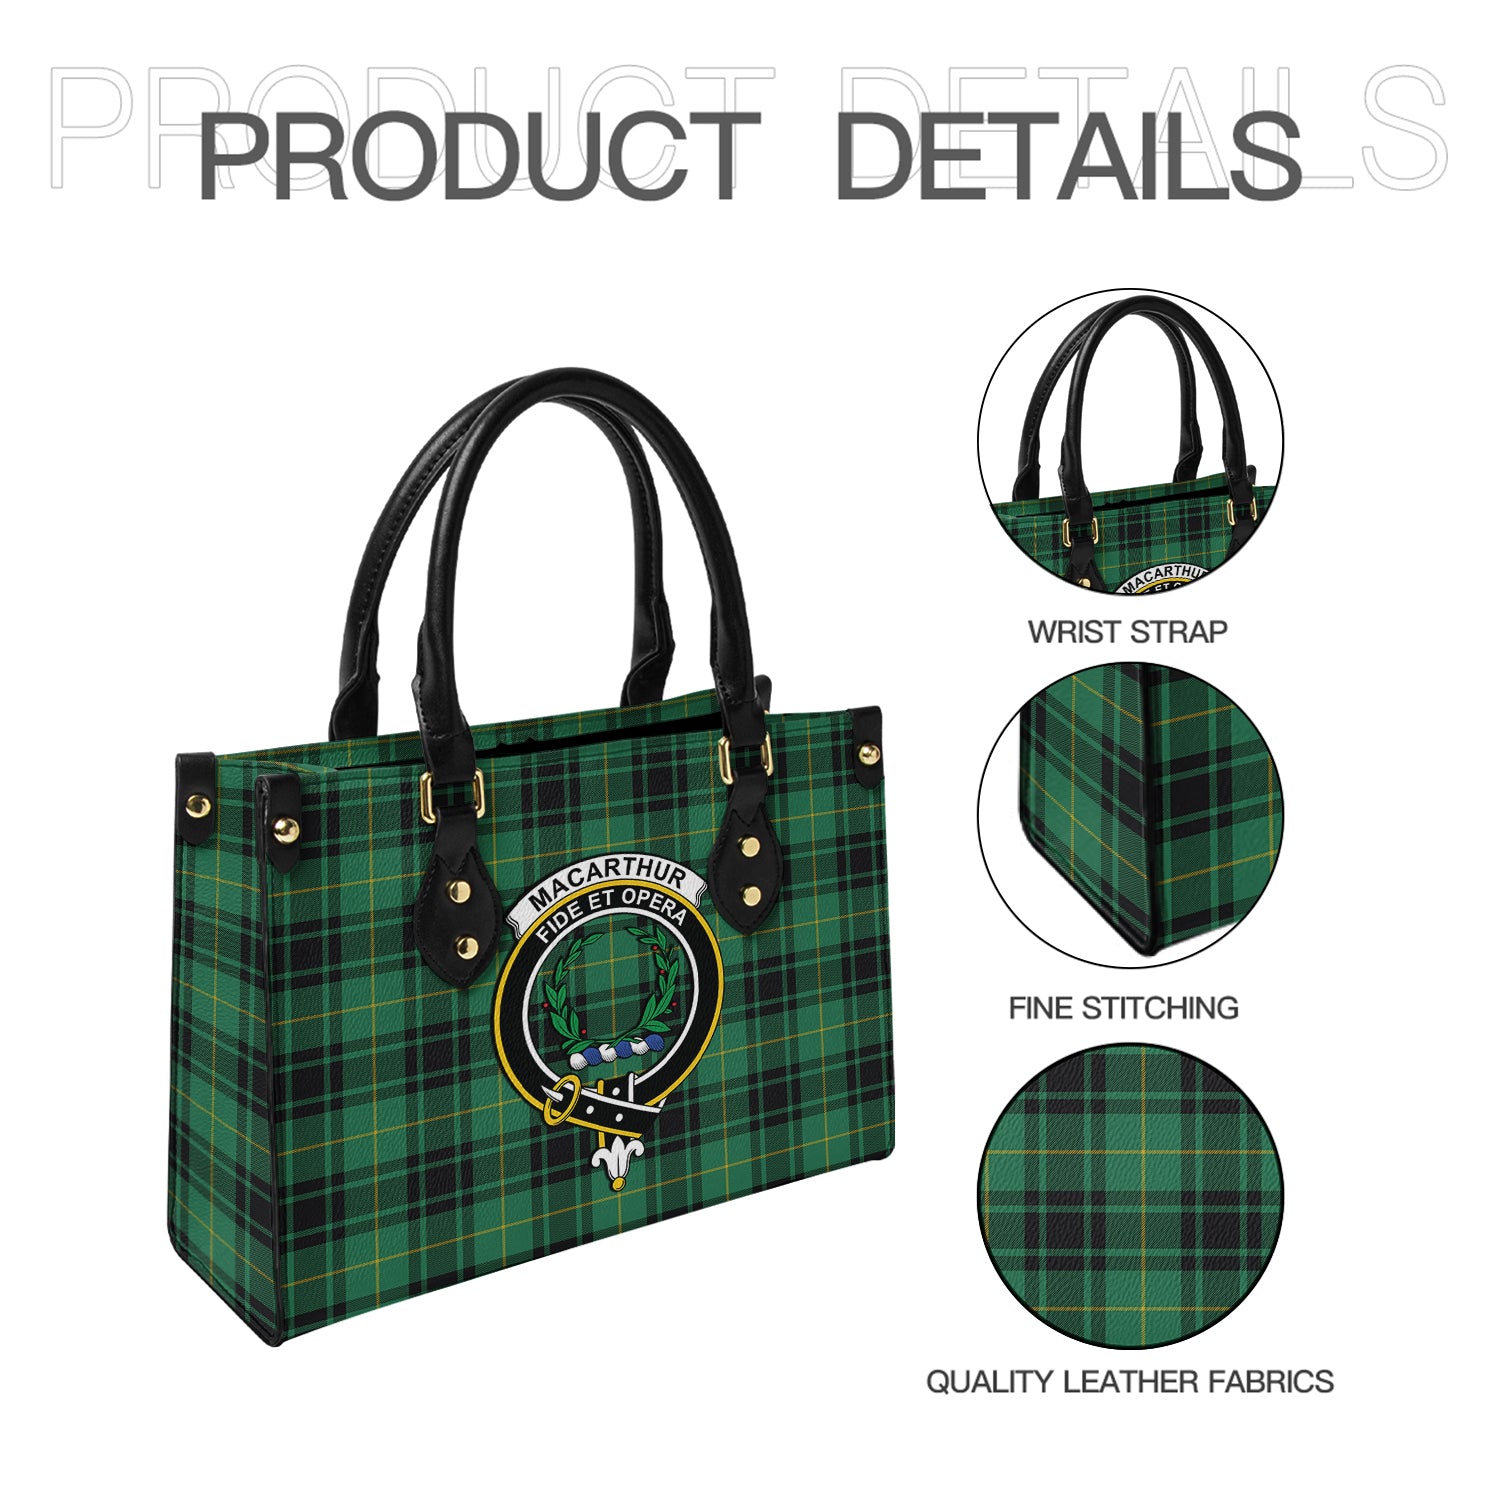 macarthur-ancient-tartan-leather-bag-with-family-crest